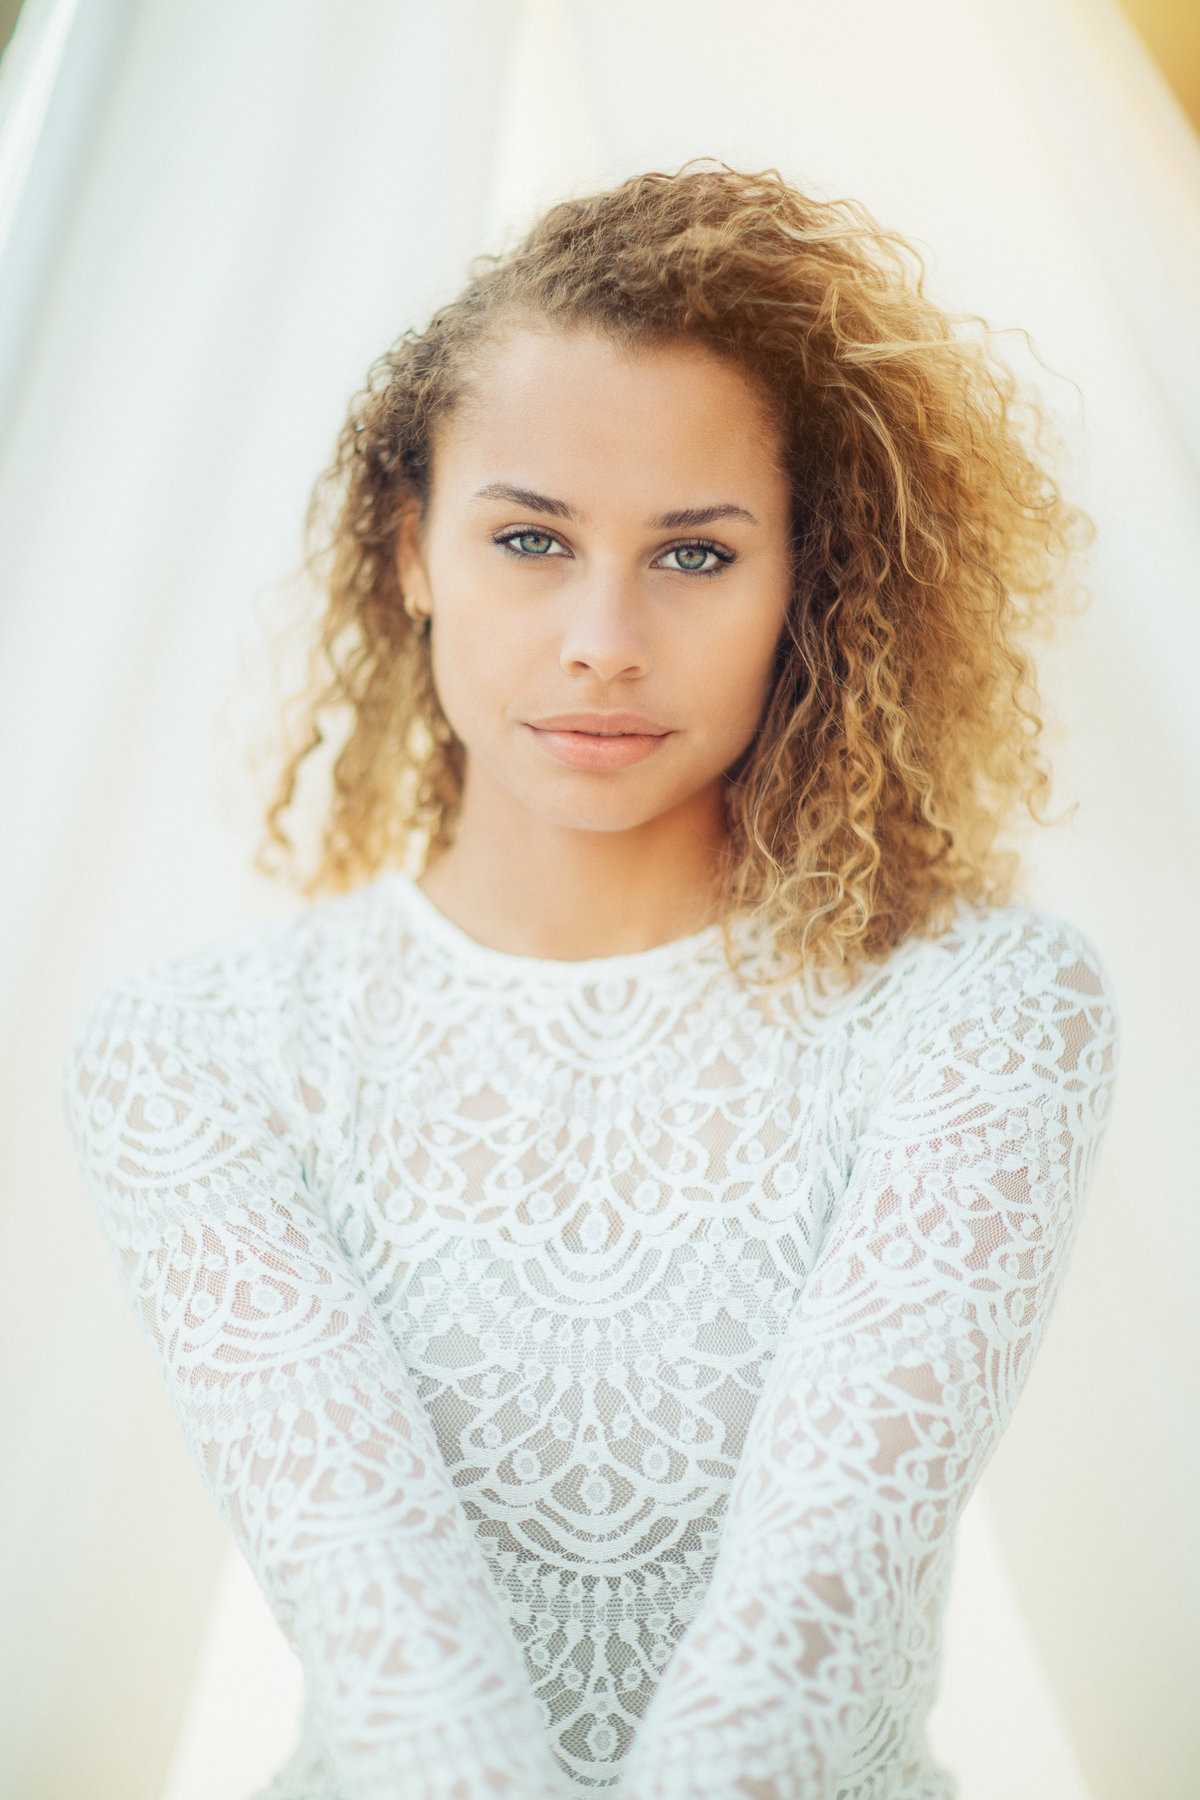 Portrait Photo Of Young Black Woman In White Dress Los Angeles